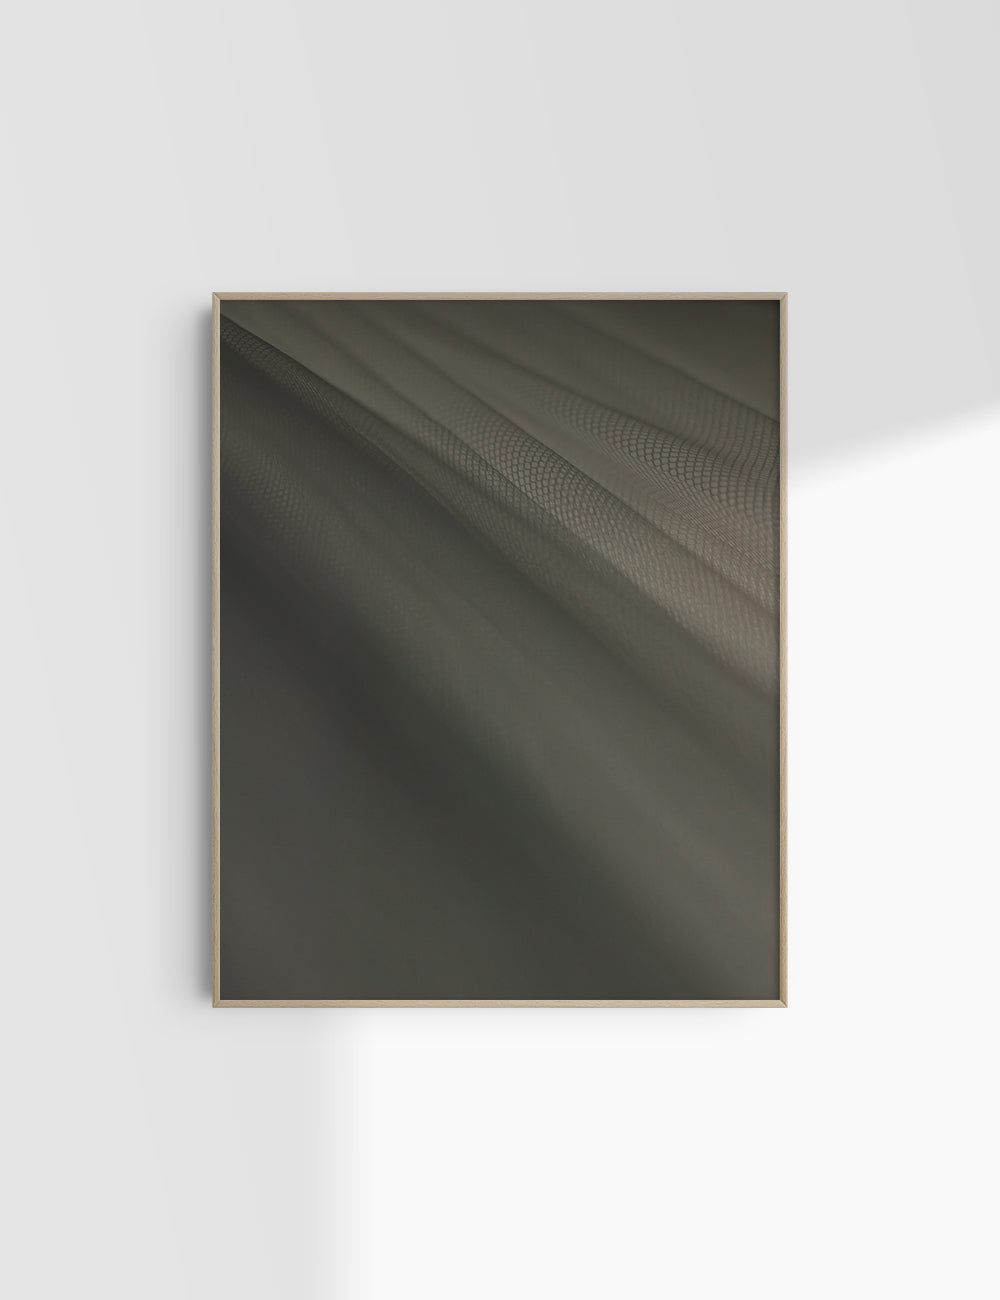 Abstract minimalist photography 1.2 Beige aesthetic. Printable wall art photography. PAPER MOON Art & Design